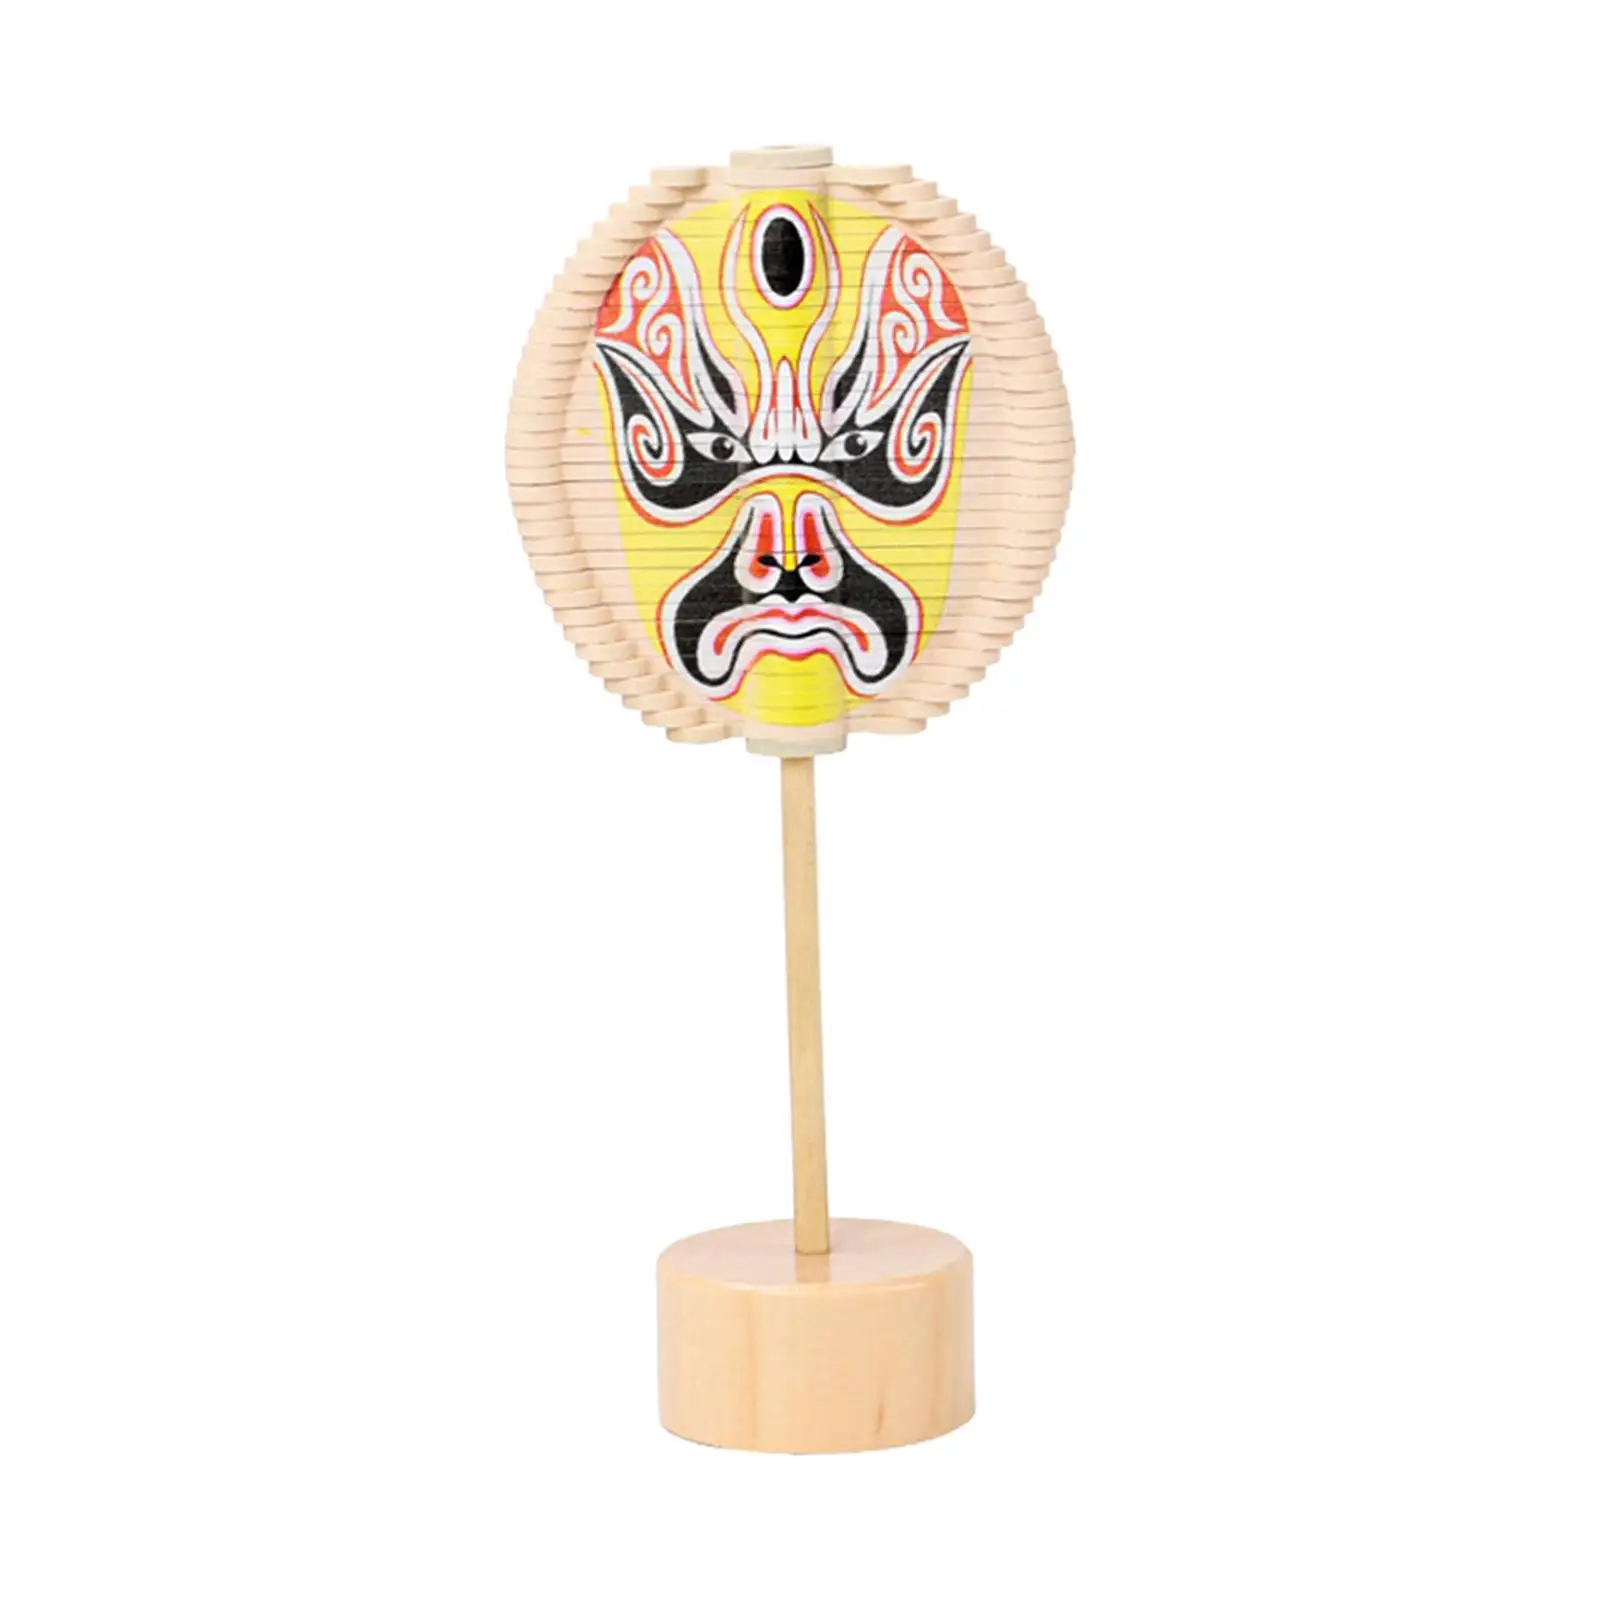 Creative Face Changing Rotating Lollipop Desktop Decoration Sensory Toys Wooden Rotating Spiral Lollipop for Birthday Home Party